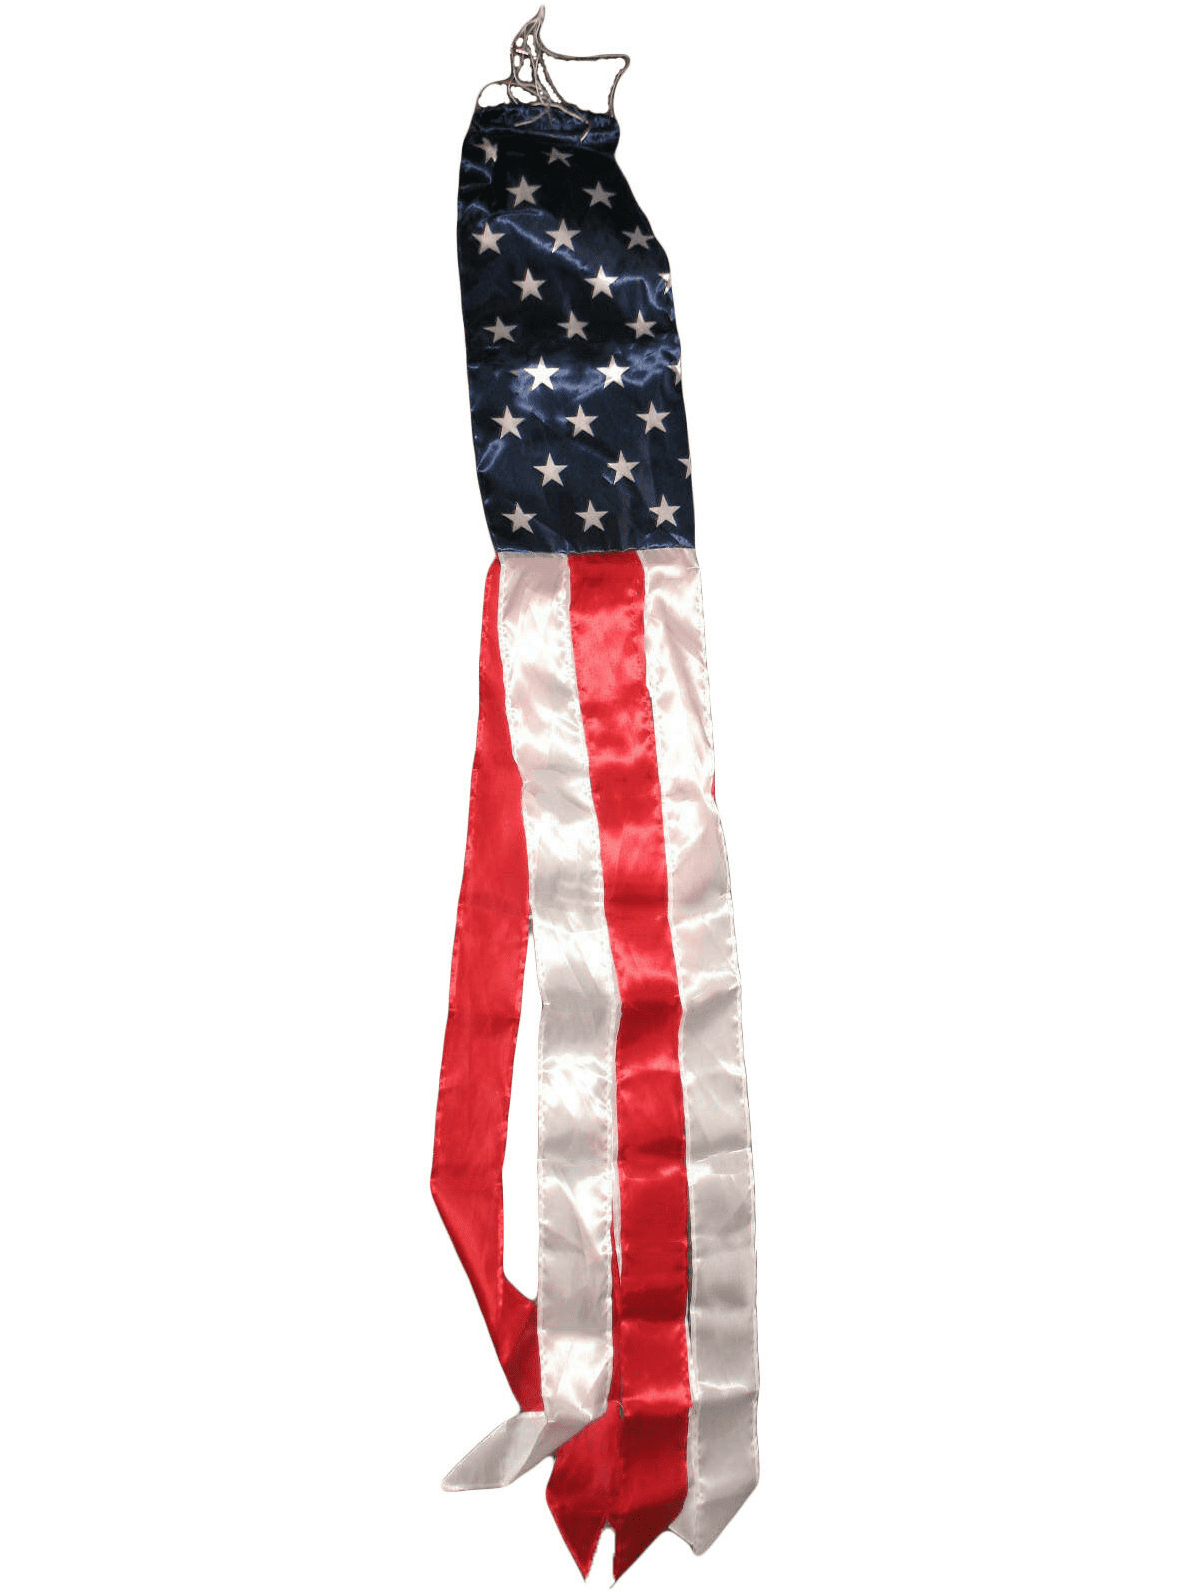 American Flag Windsock Show United States Patriotic Support USA Windsock 